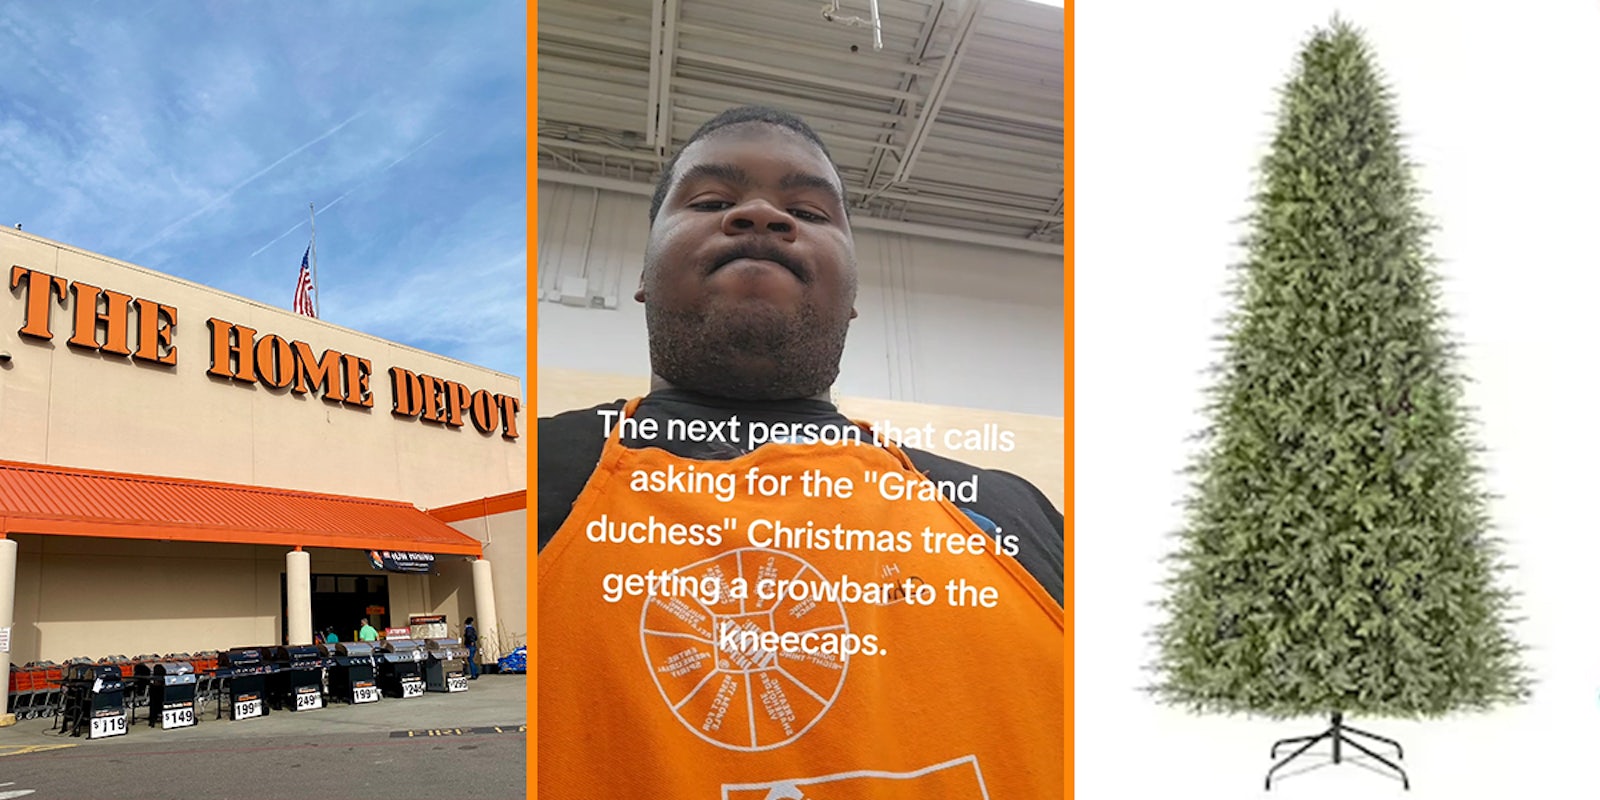 Home Depot building with sign (l) Home Depot employee with caption 'The next person that calls asking for the 'grand duchess Christmas tree is getting a crowbar to the kneecaps.' (c) Home Depot Grand Duchess Christmas tree in front of white background (r)